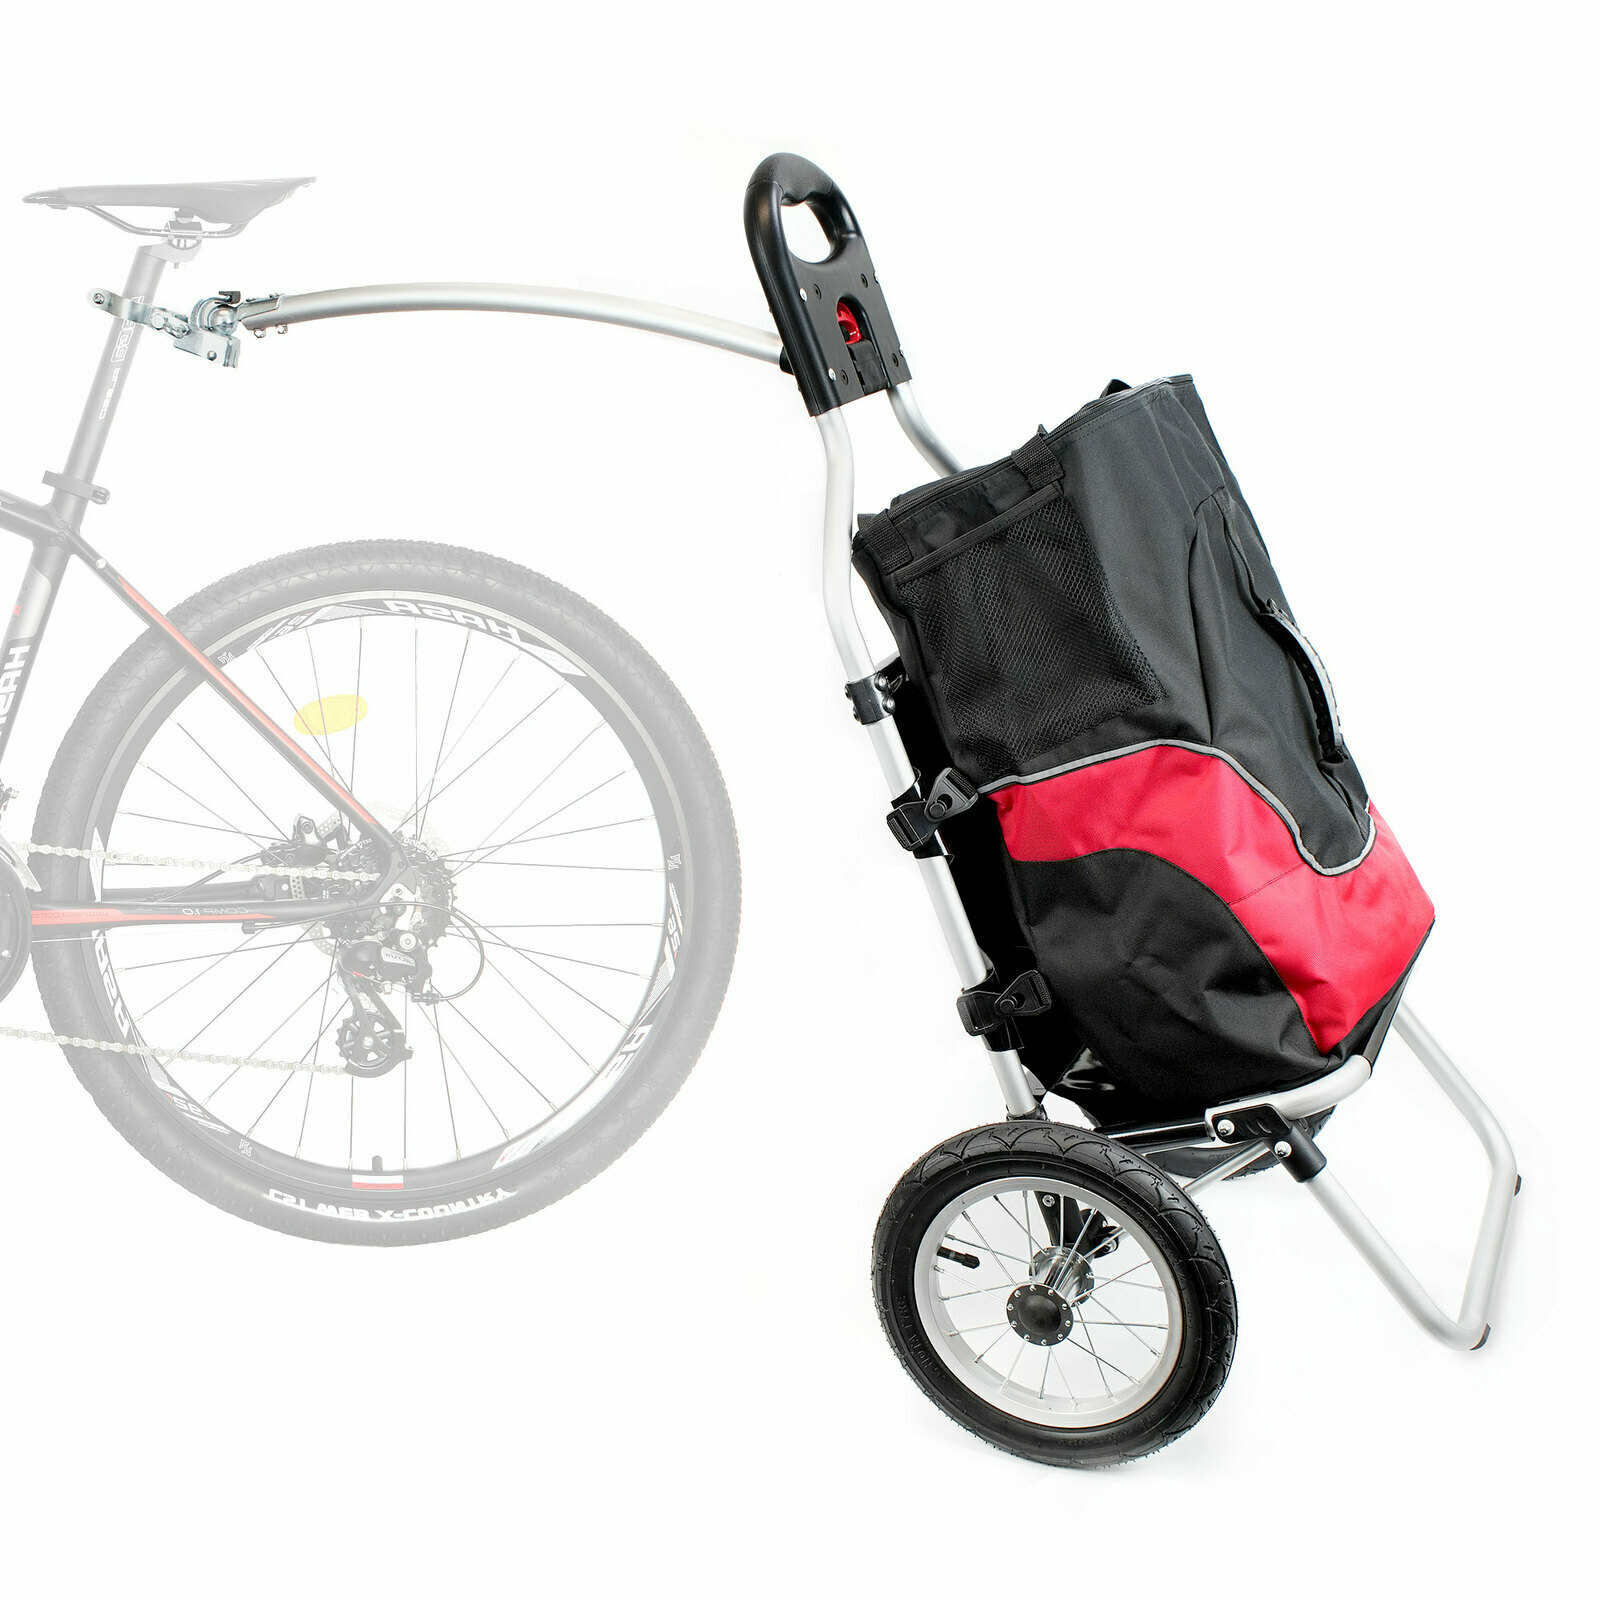 Buy Cyclingdeal Foldable Bicycle Bike Shopping Trailer With